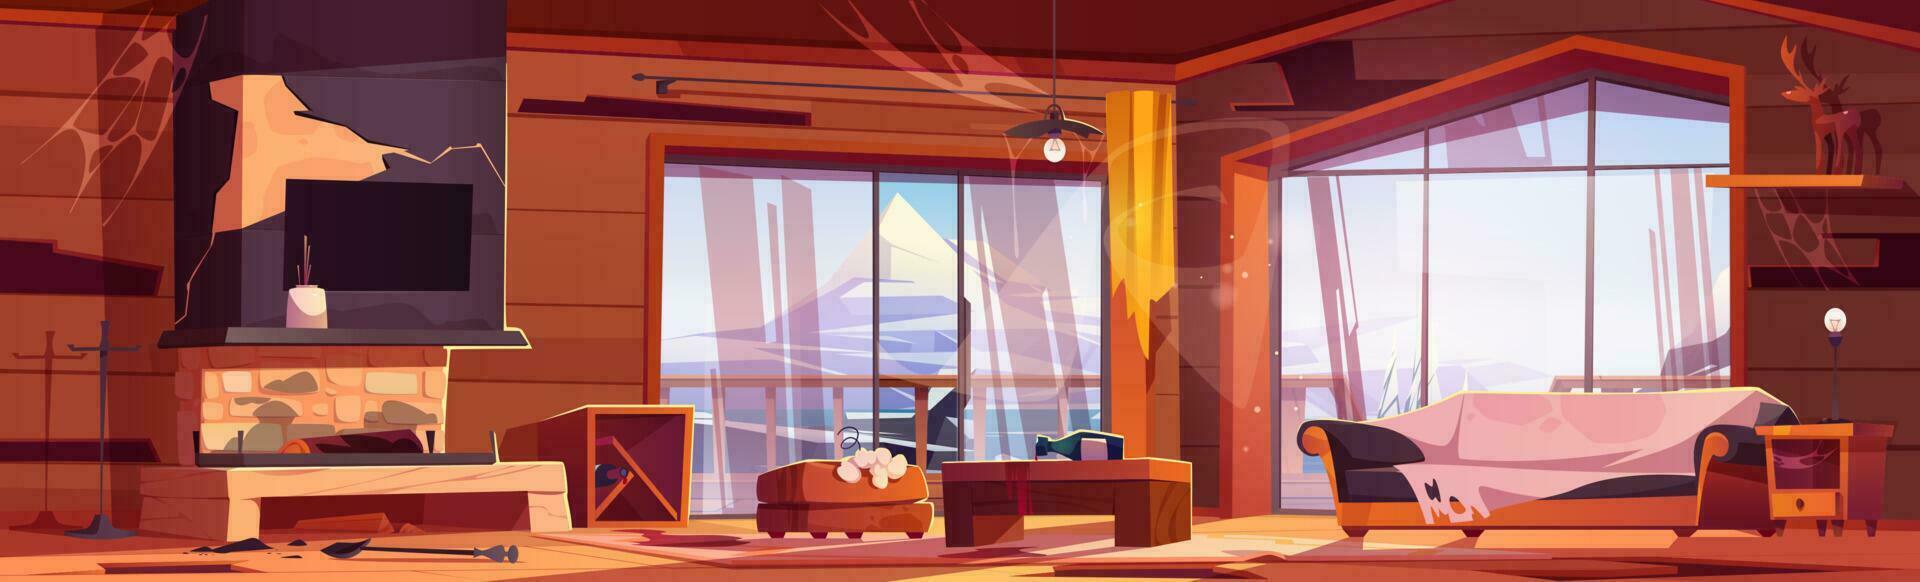 Abandoned chalet interior with mountain view vector